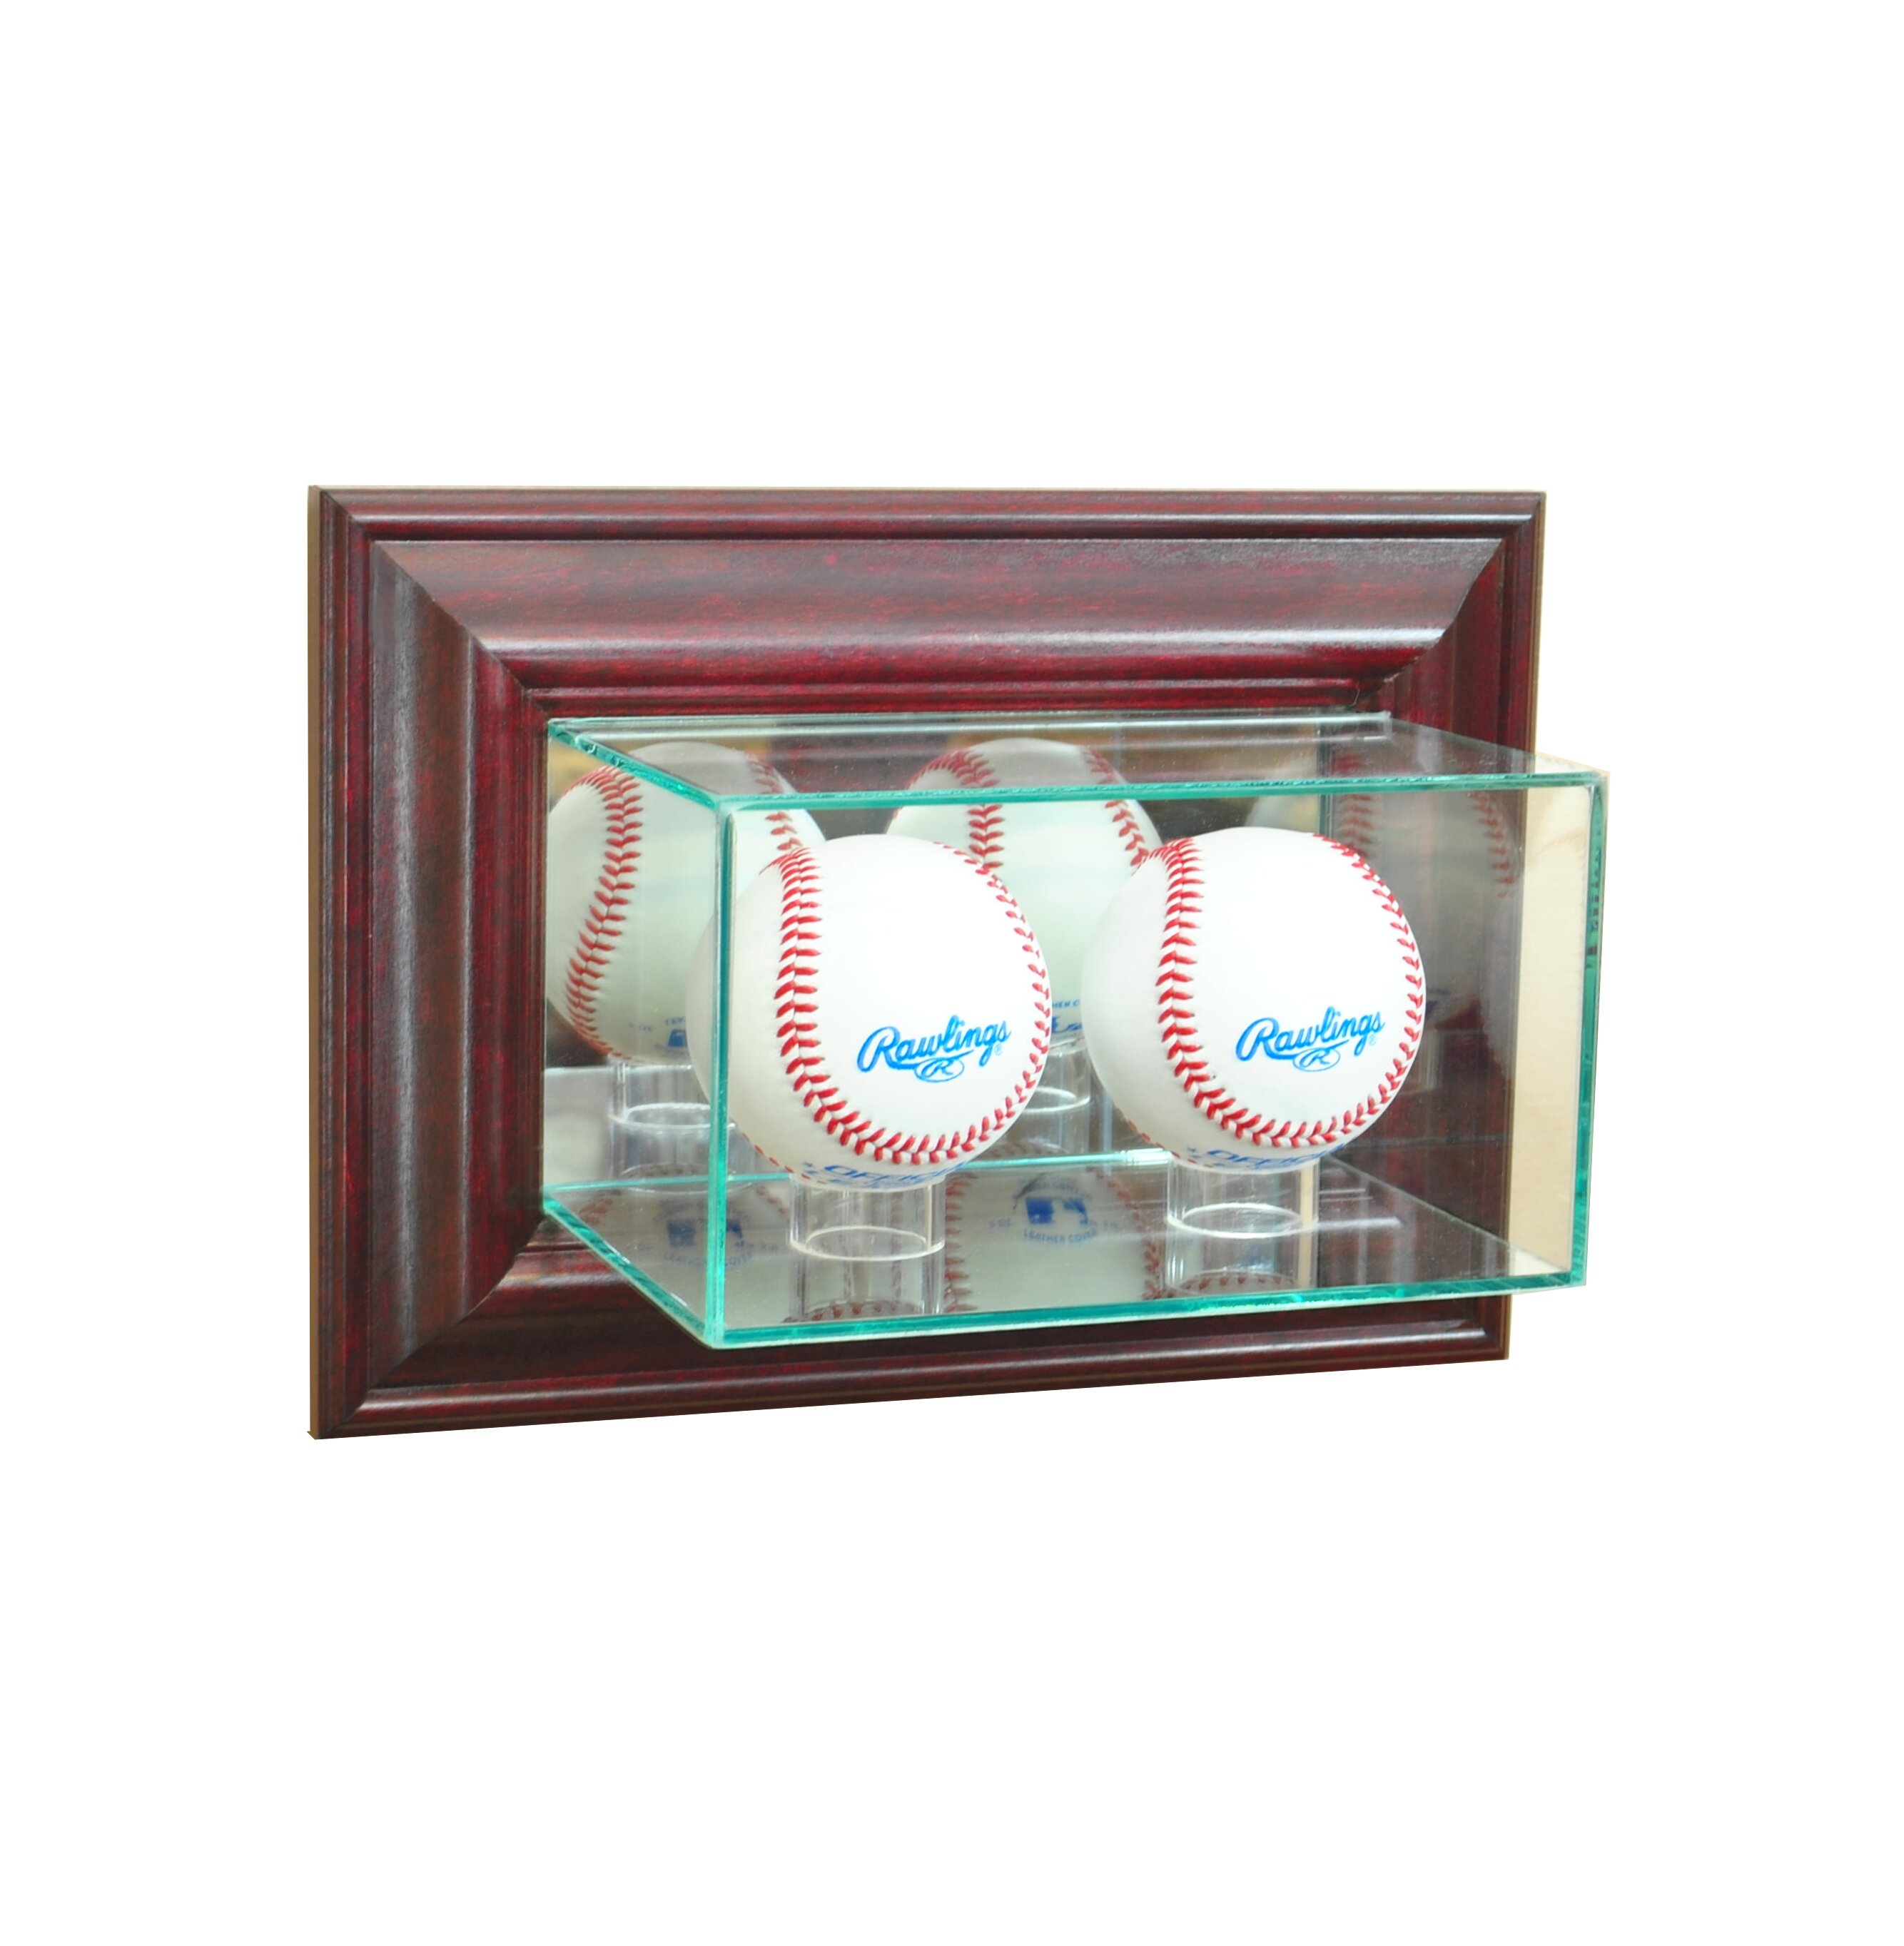 GLASS WALL MOUNT BASEBALL BAT DISPLAY CASE WITH UV PROTECTION CHERRY WOOD FRAME 